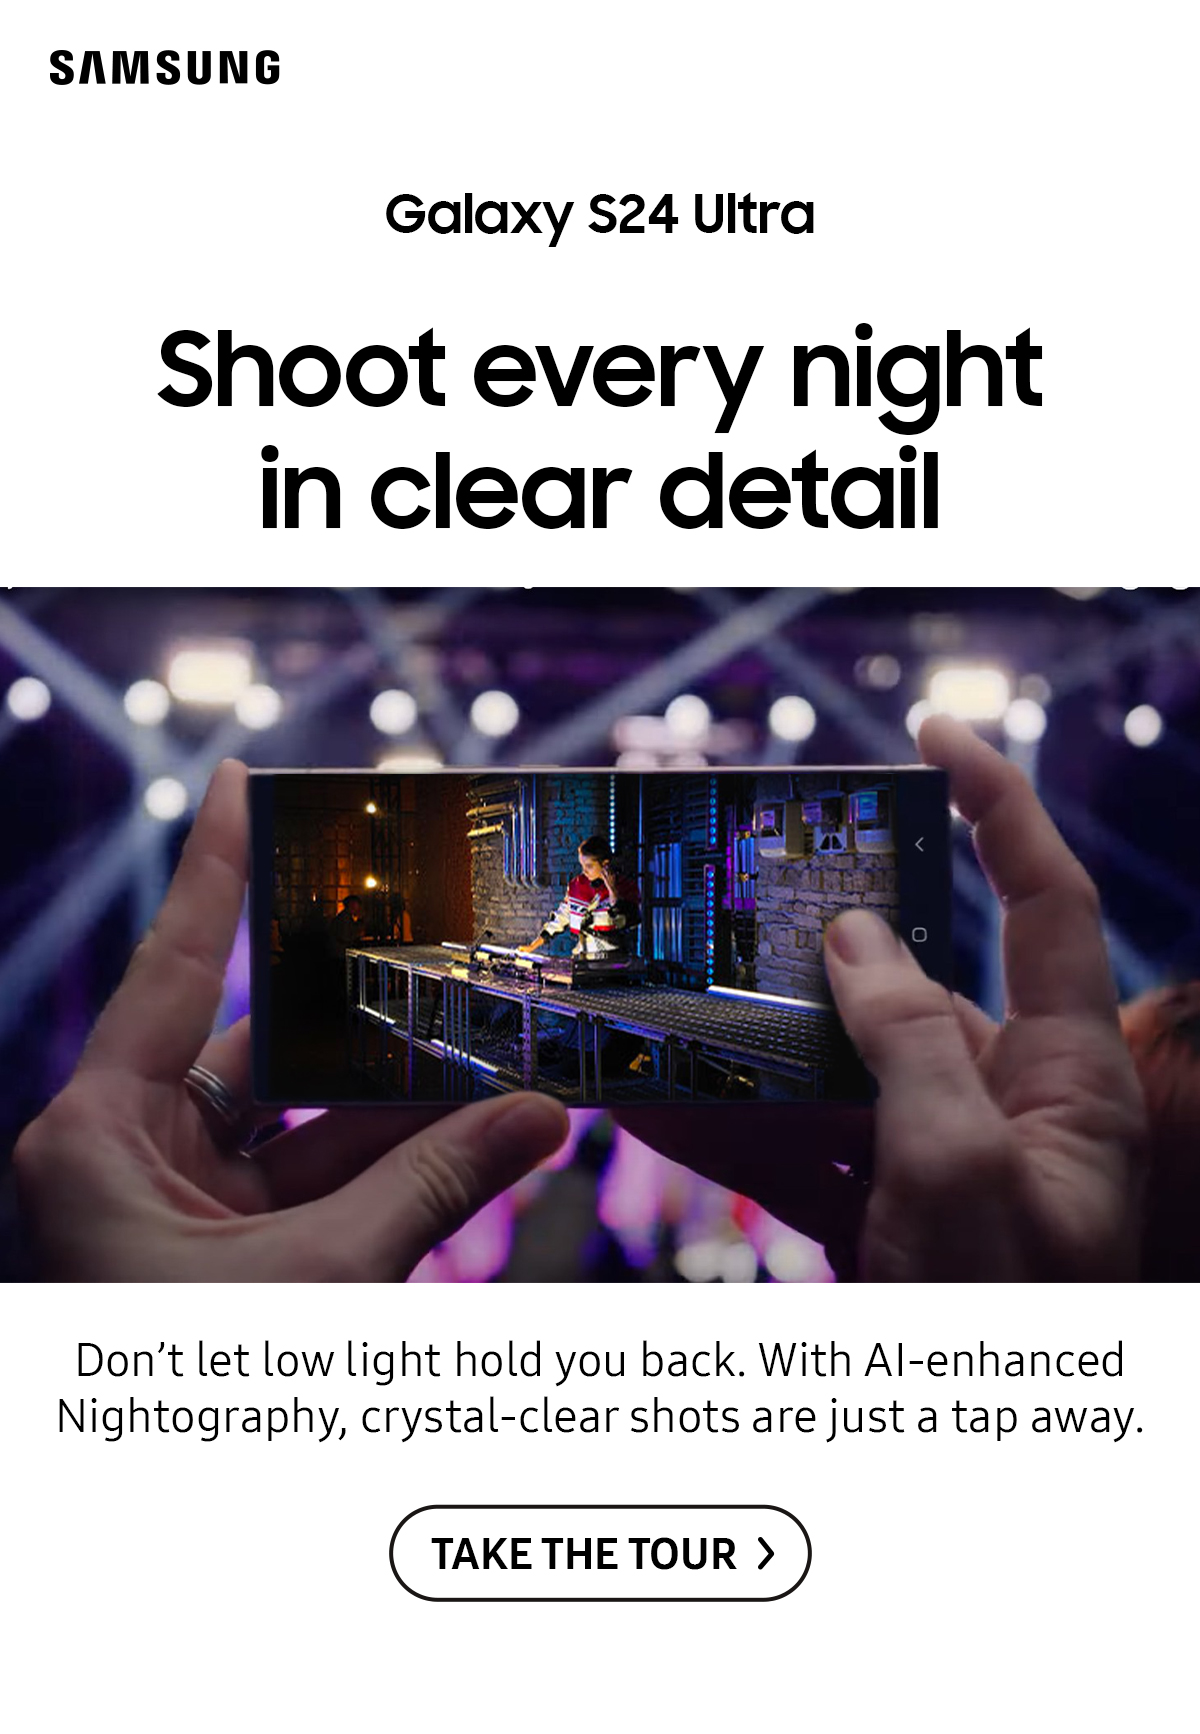 Shoot every night in clear detail | Don't let low light hold you back. With Al-enhanced Nightography, crystal-clear shots are just a tap away.